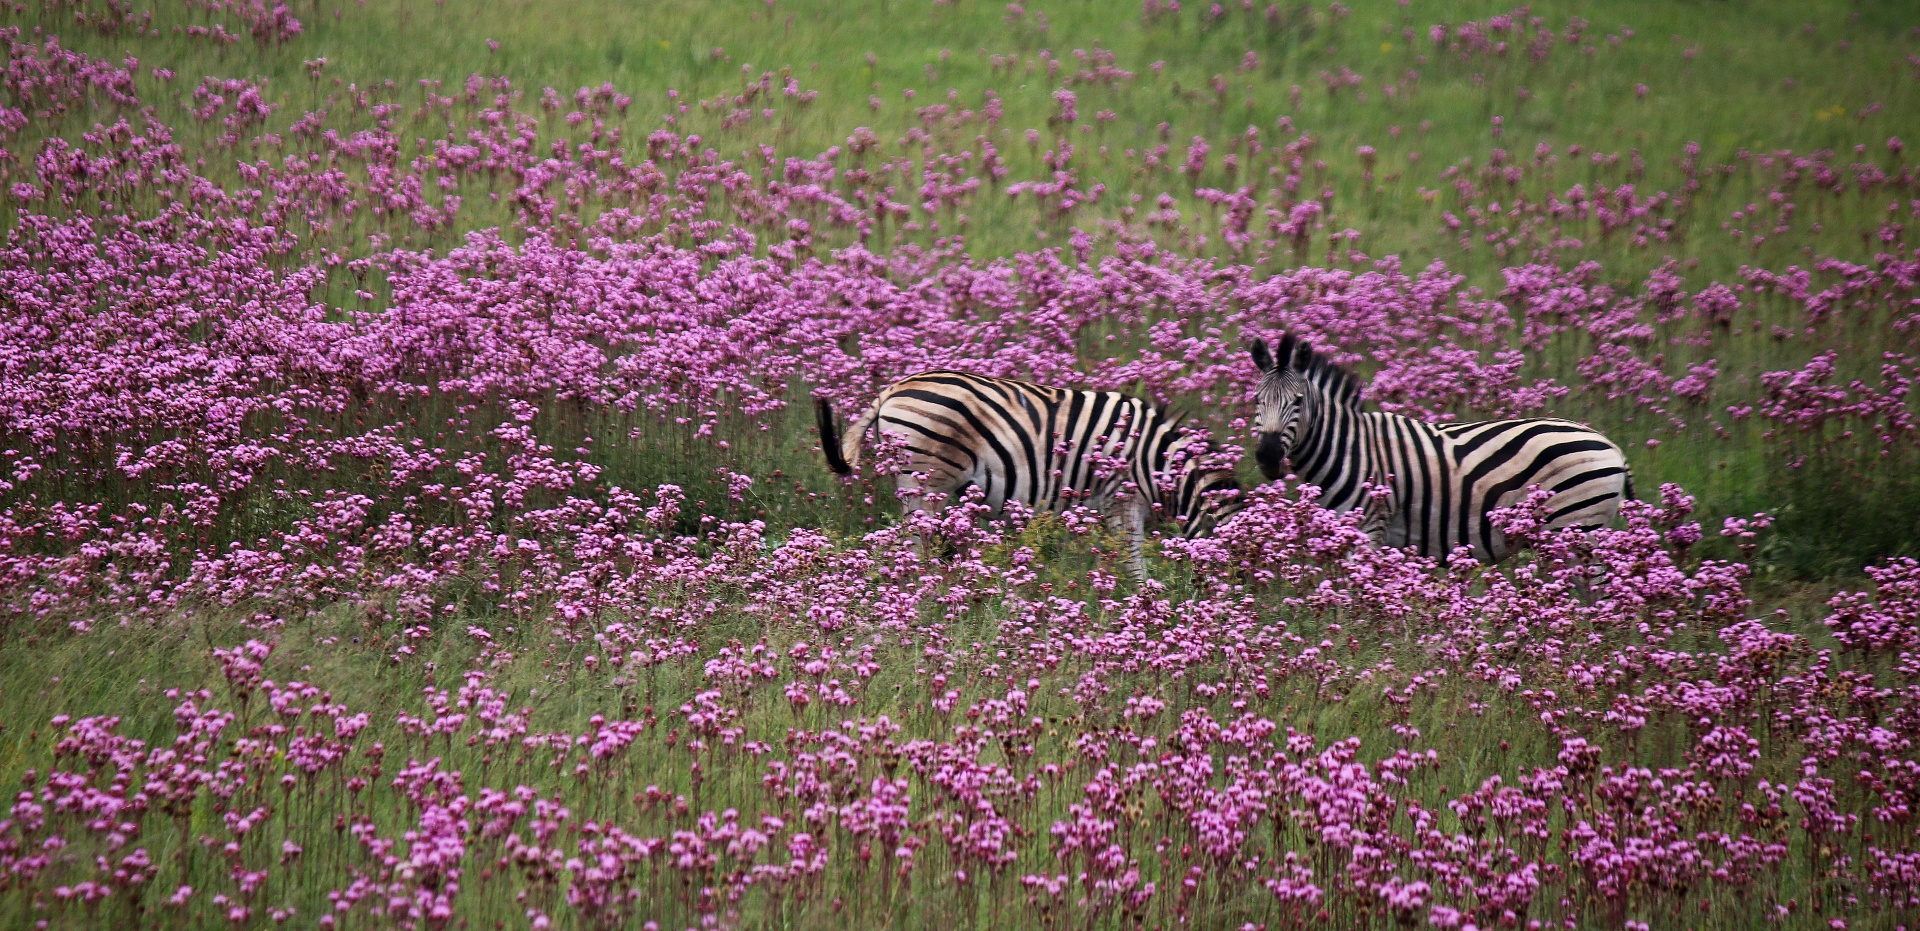 Zebra Contrasting With A Field